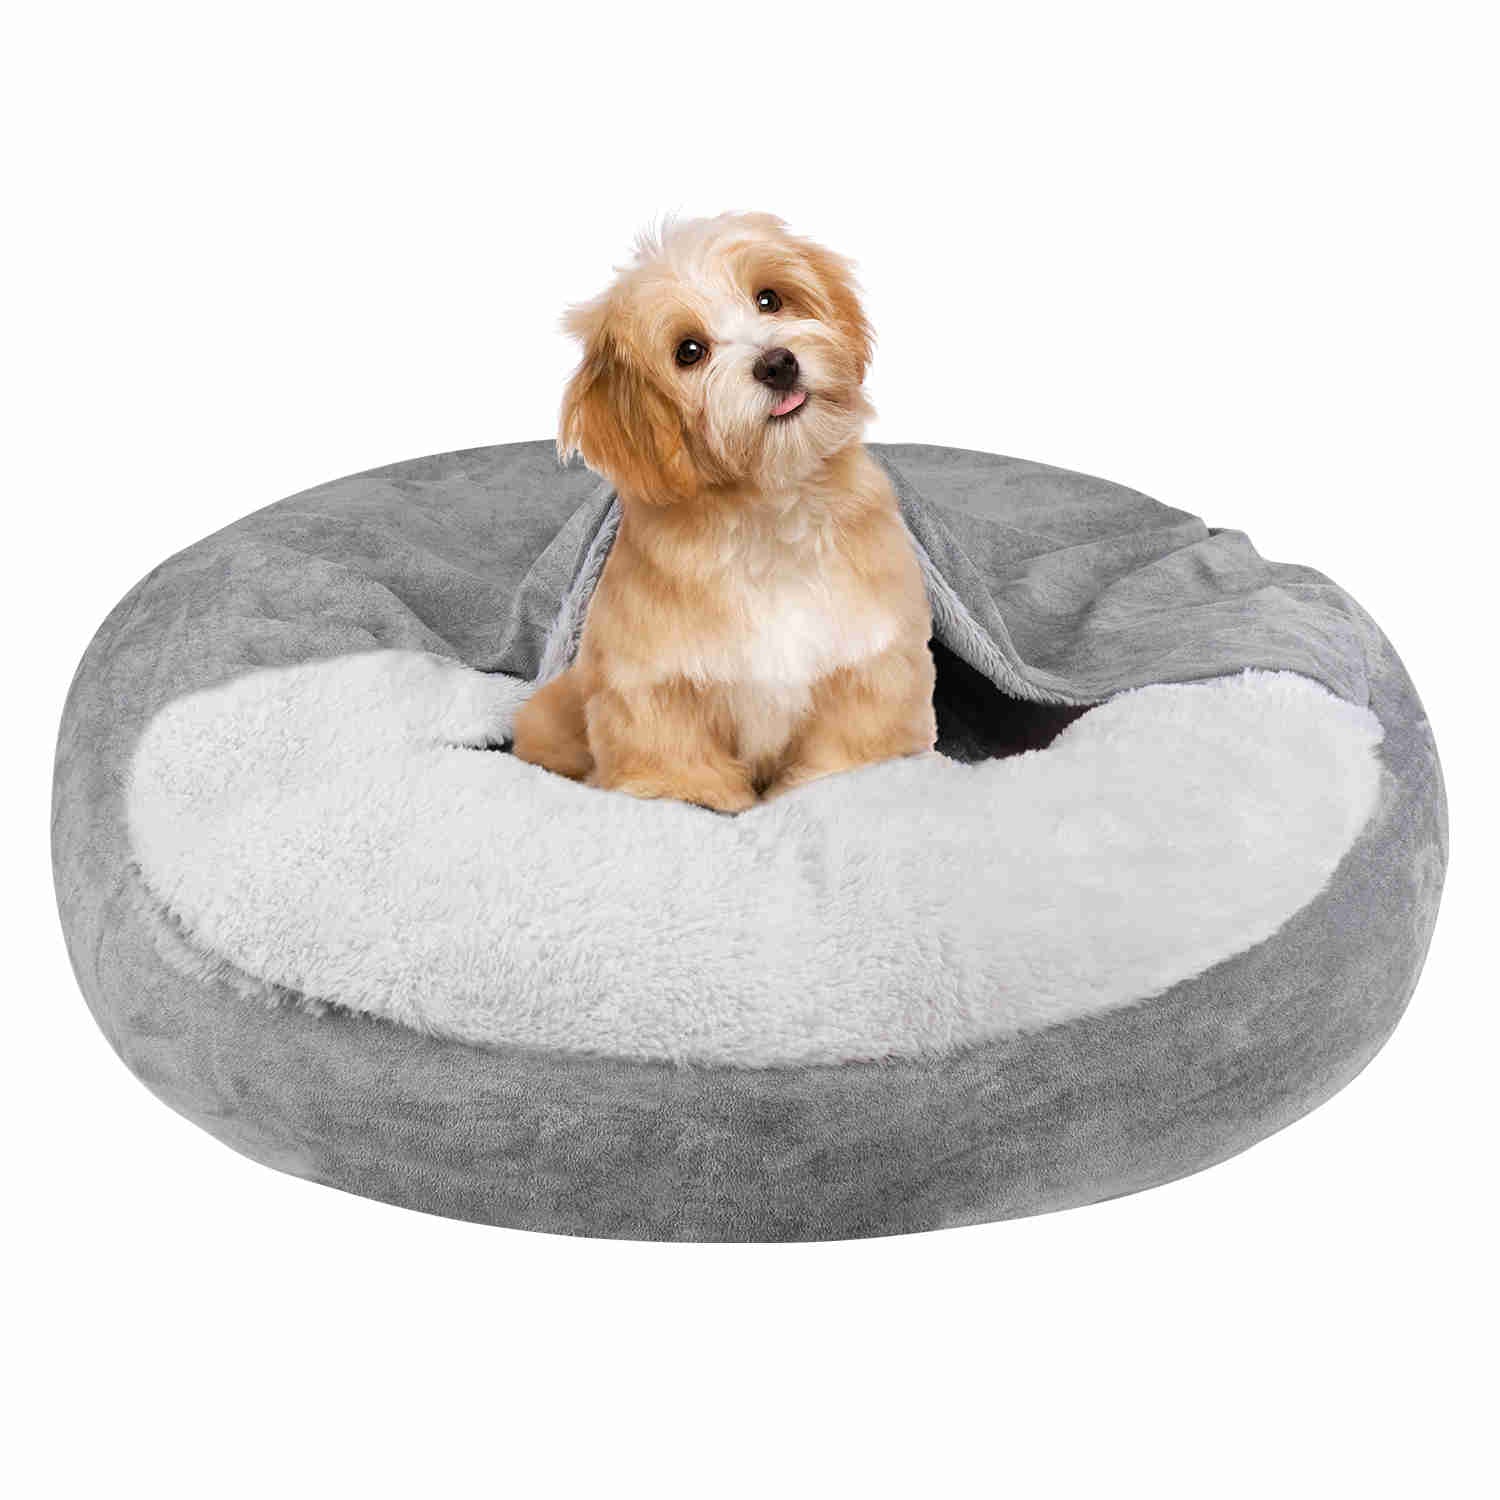 Covered Pet Bed, Washable, Gray, 1 Pack